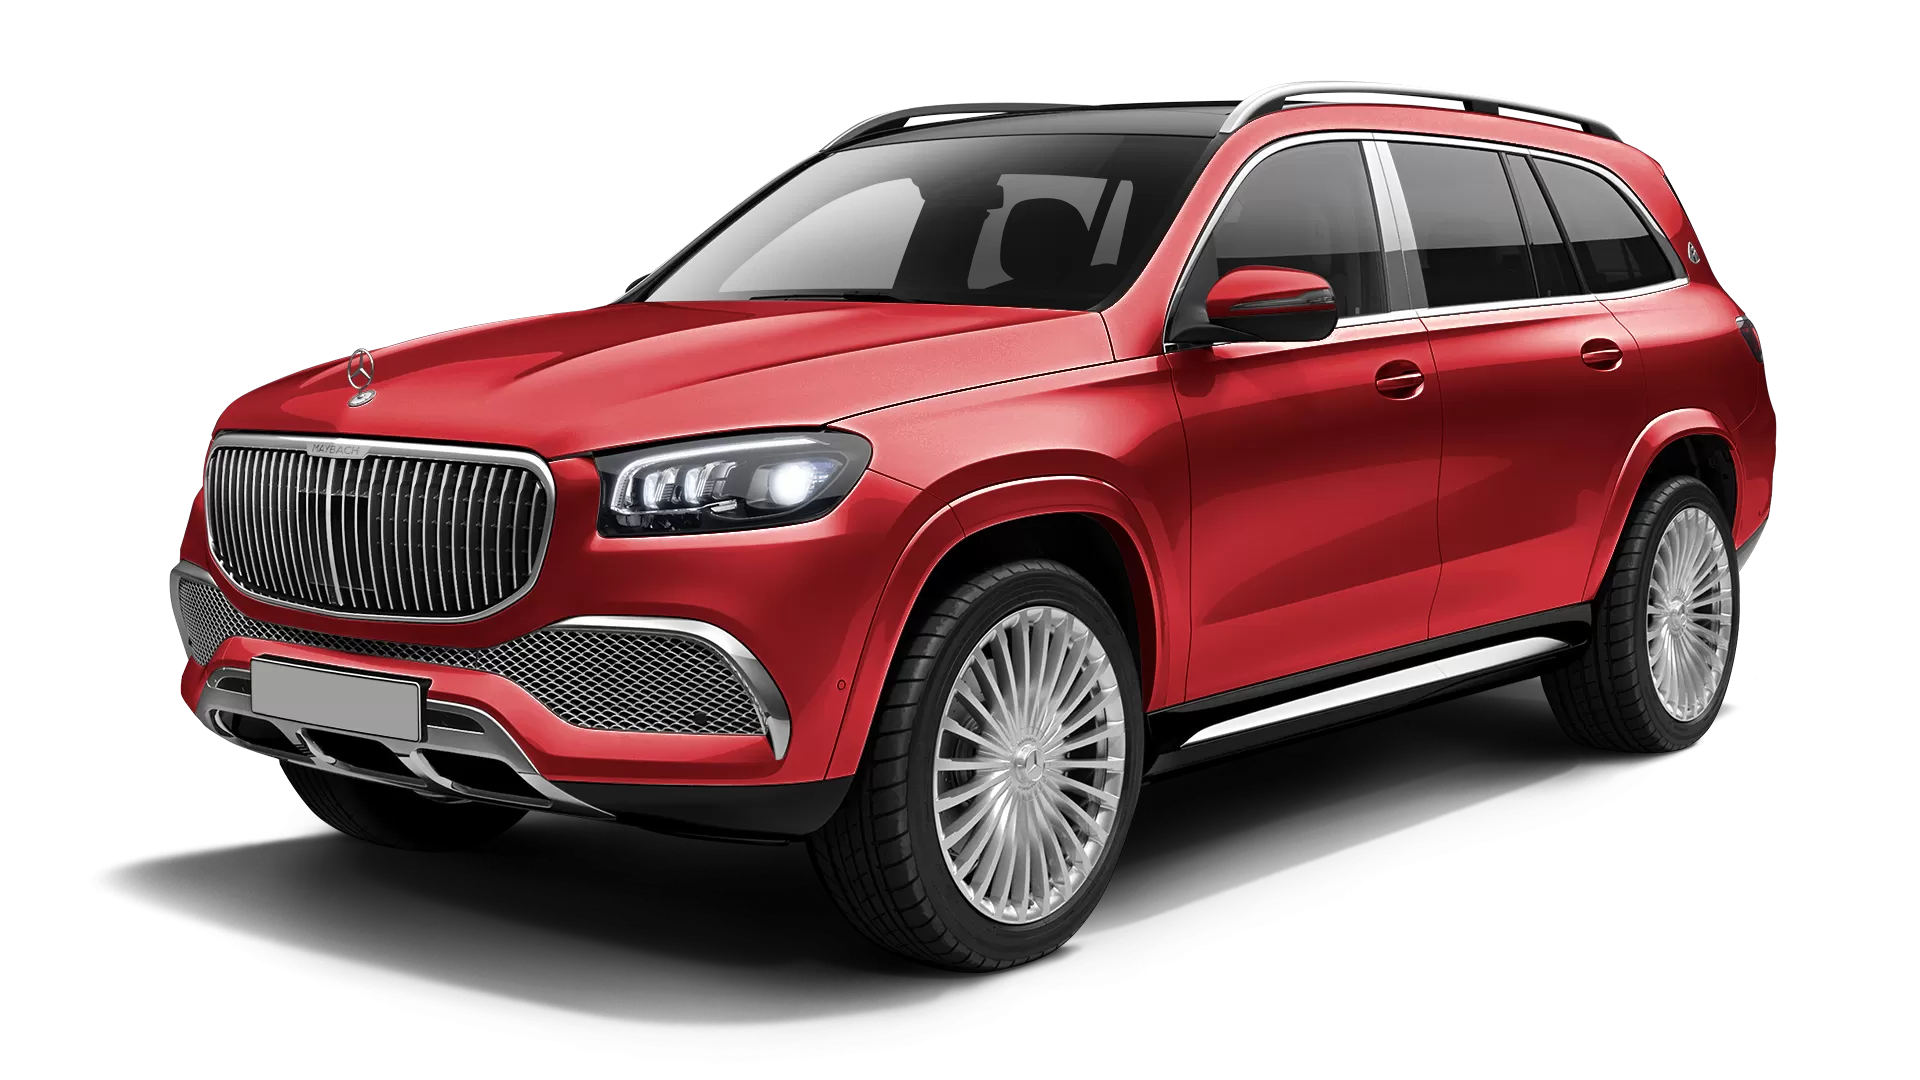 Mercedes Maybach GLS 600 stock front view in Hyacinthe Red color